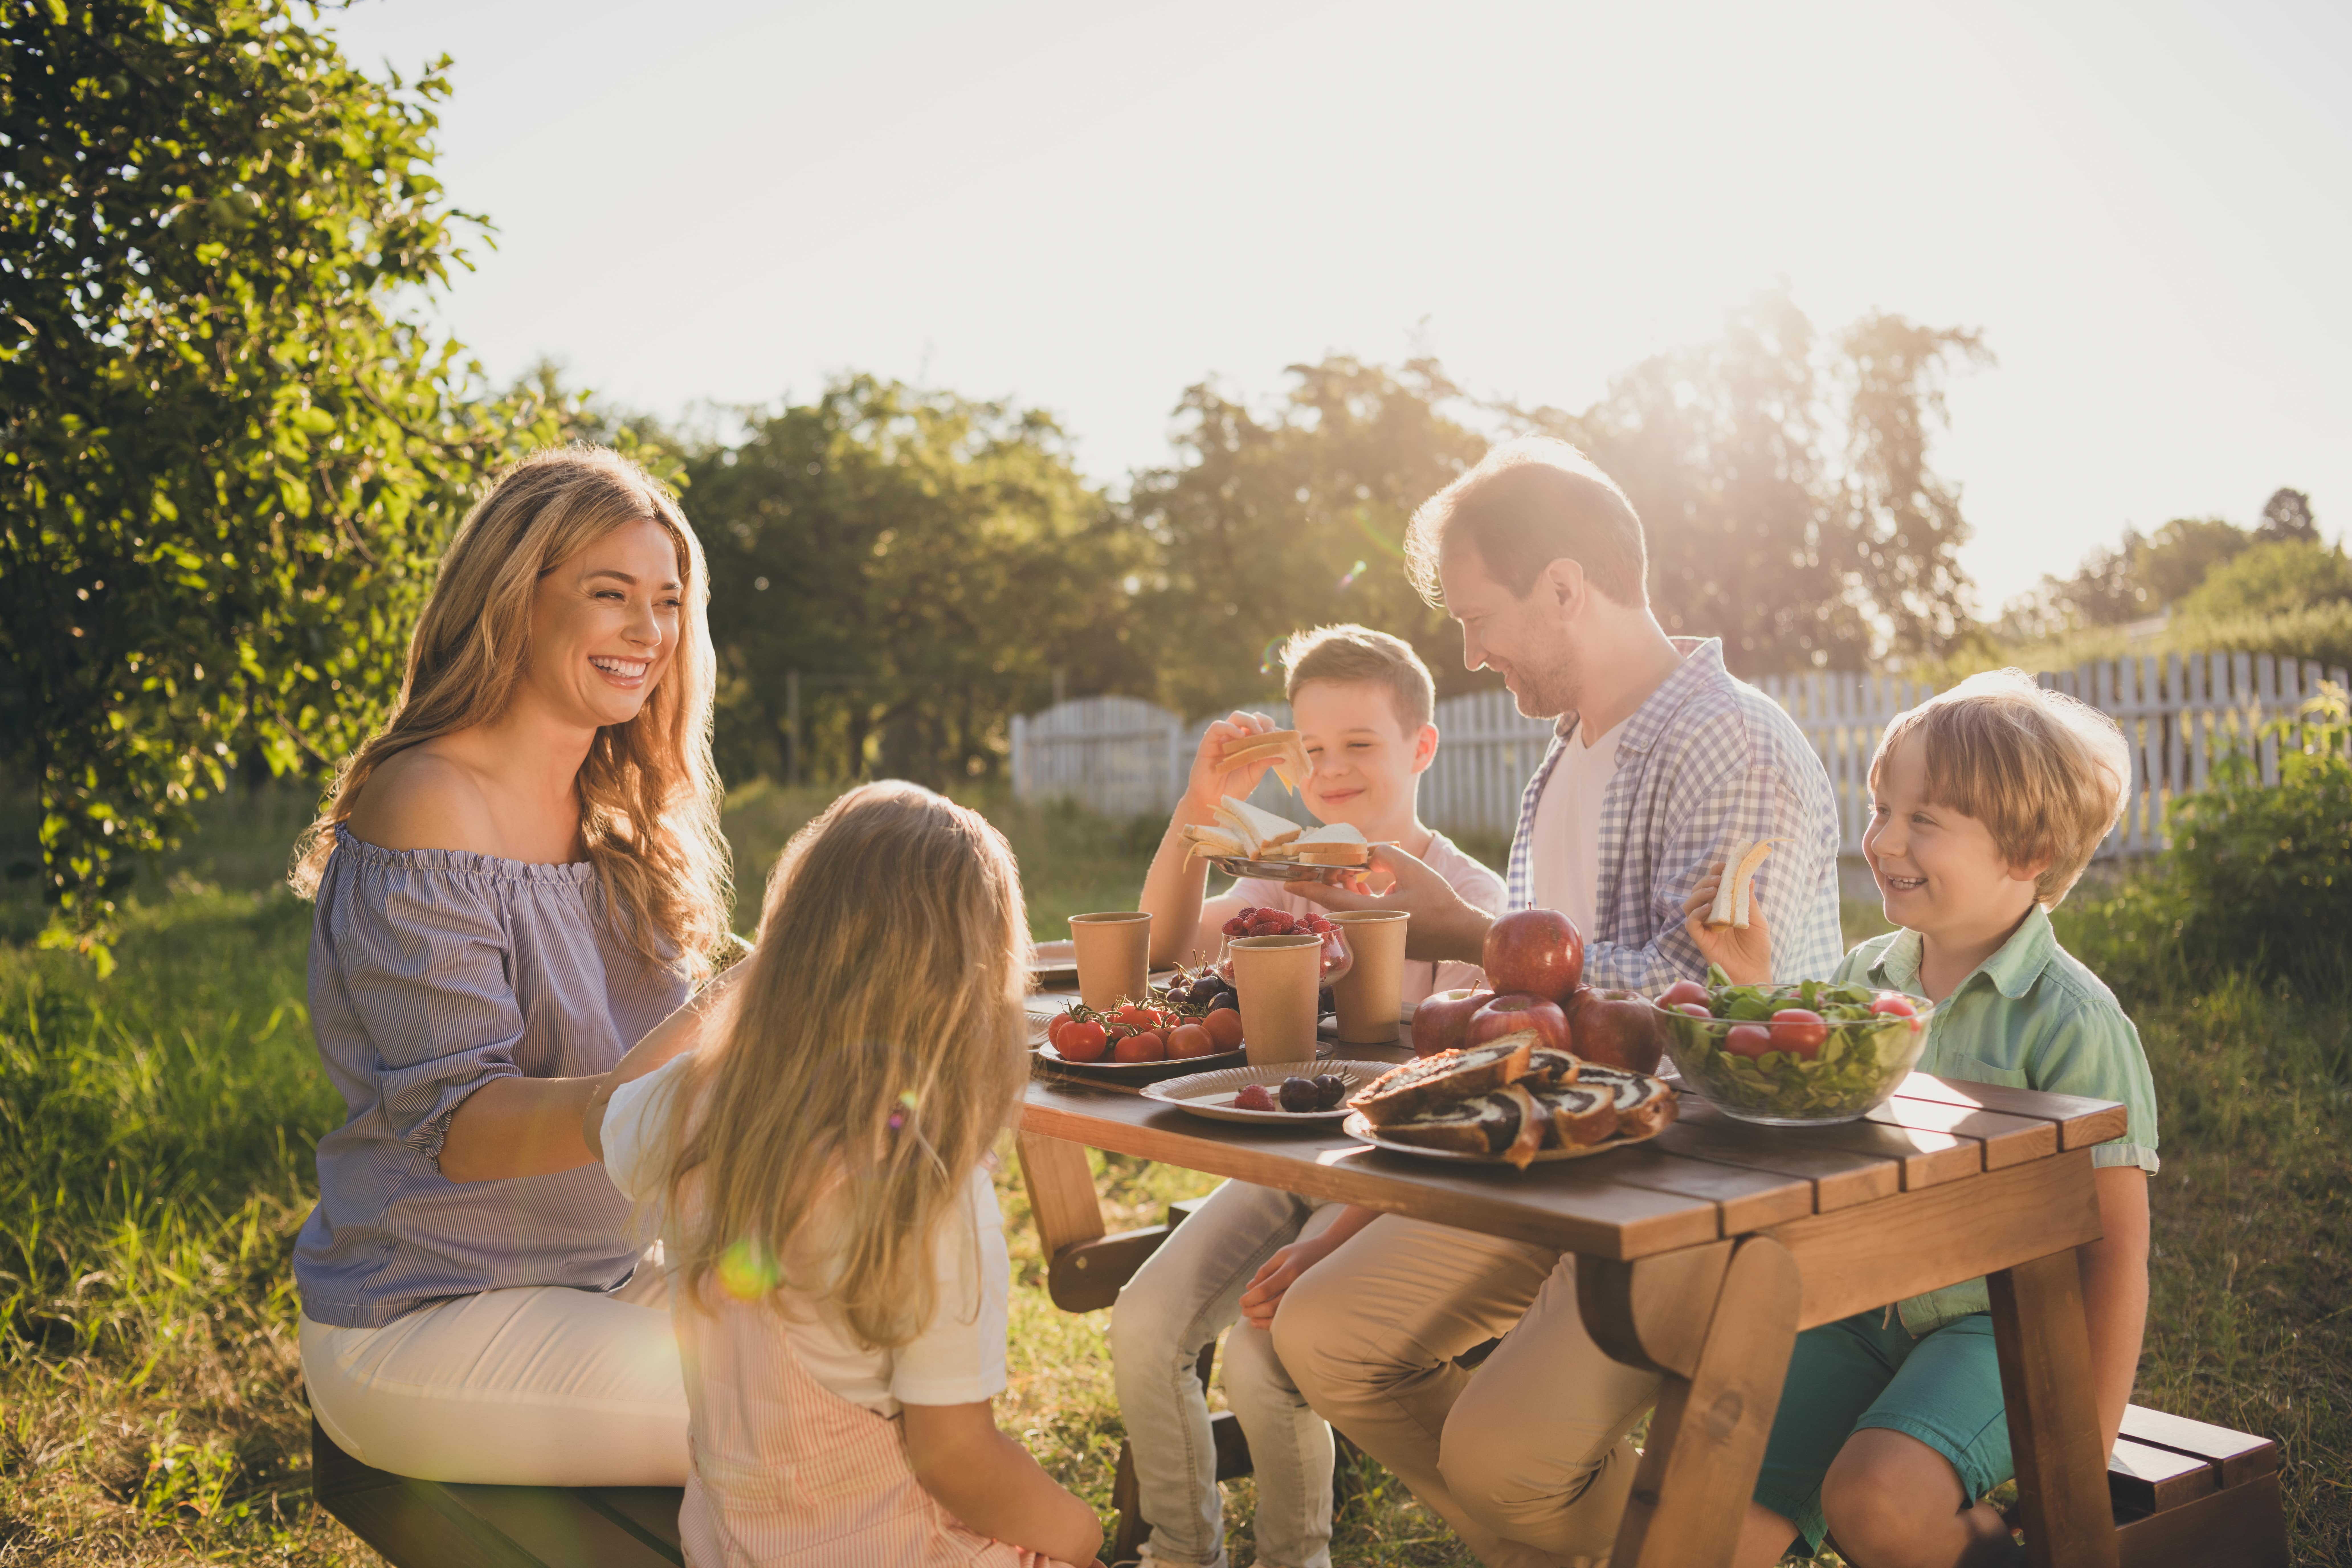 A family of five sat in the the garden surrounded by greenery eating a lunch of sandwiches, salad and cake at a picnic table